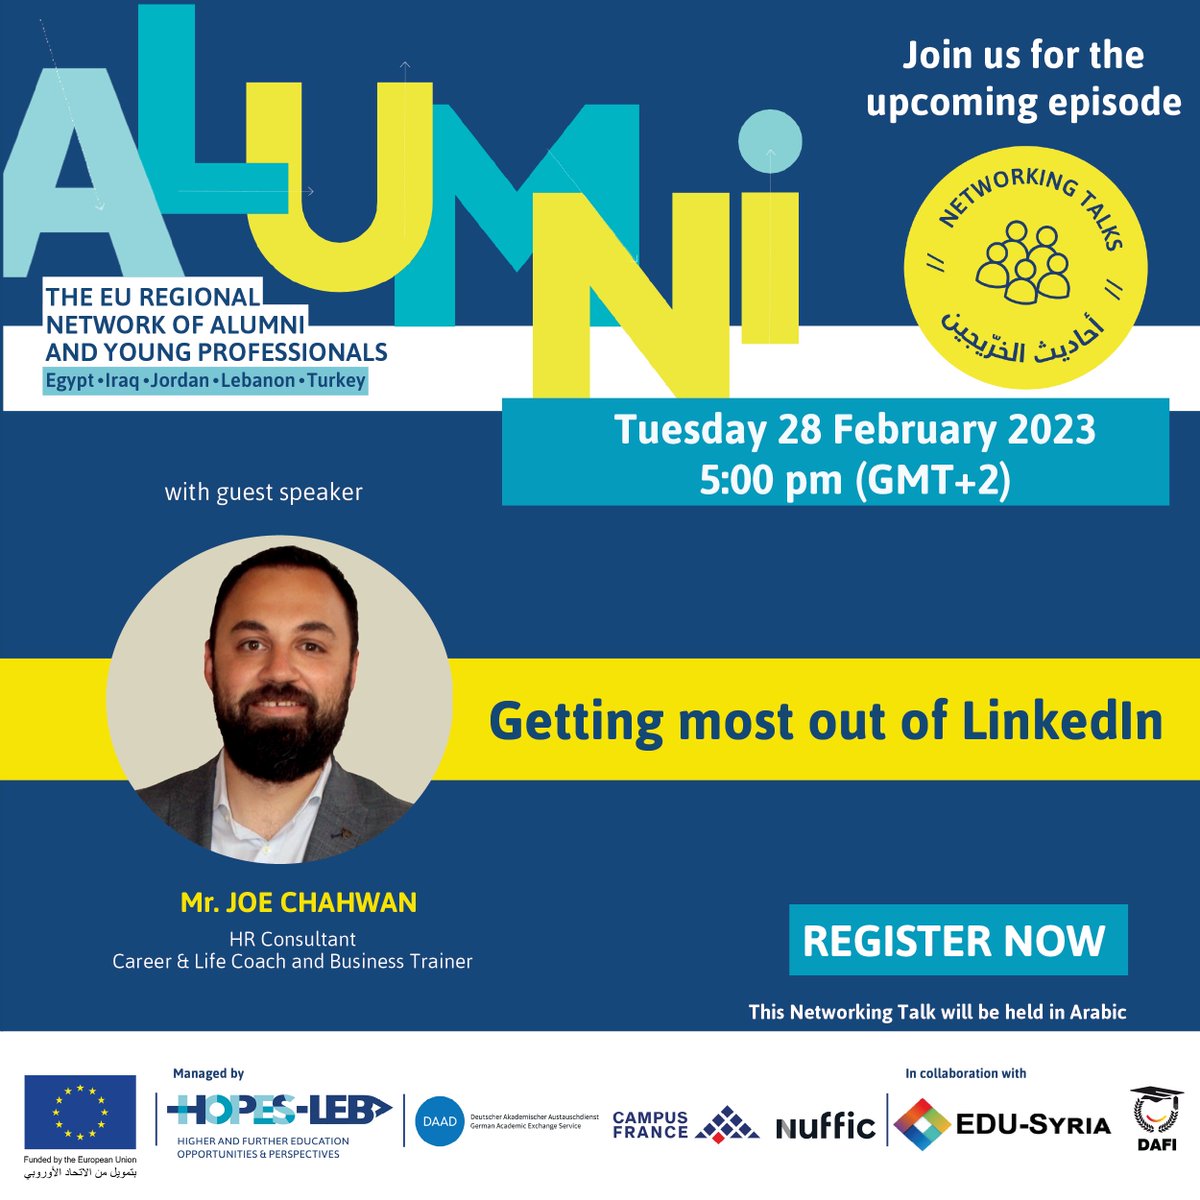 Do you want to get the most out of LinkedIn? Join the upcoming episode of Networking Talks with HR Consultant, Career & Life Coach and Business Trainer Mr. Joe Chahwan. Register now to participate in this mini-workshop for free: framaforms.org/stmr-ltsjyl-fy…